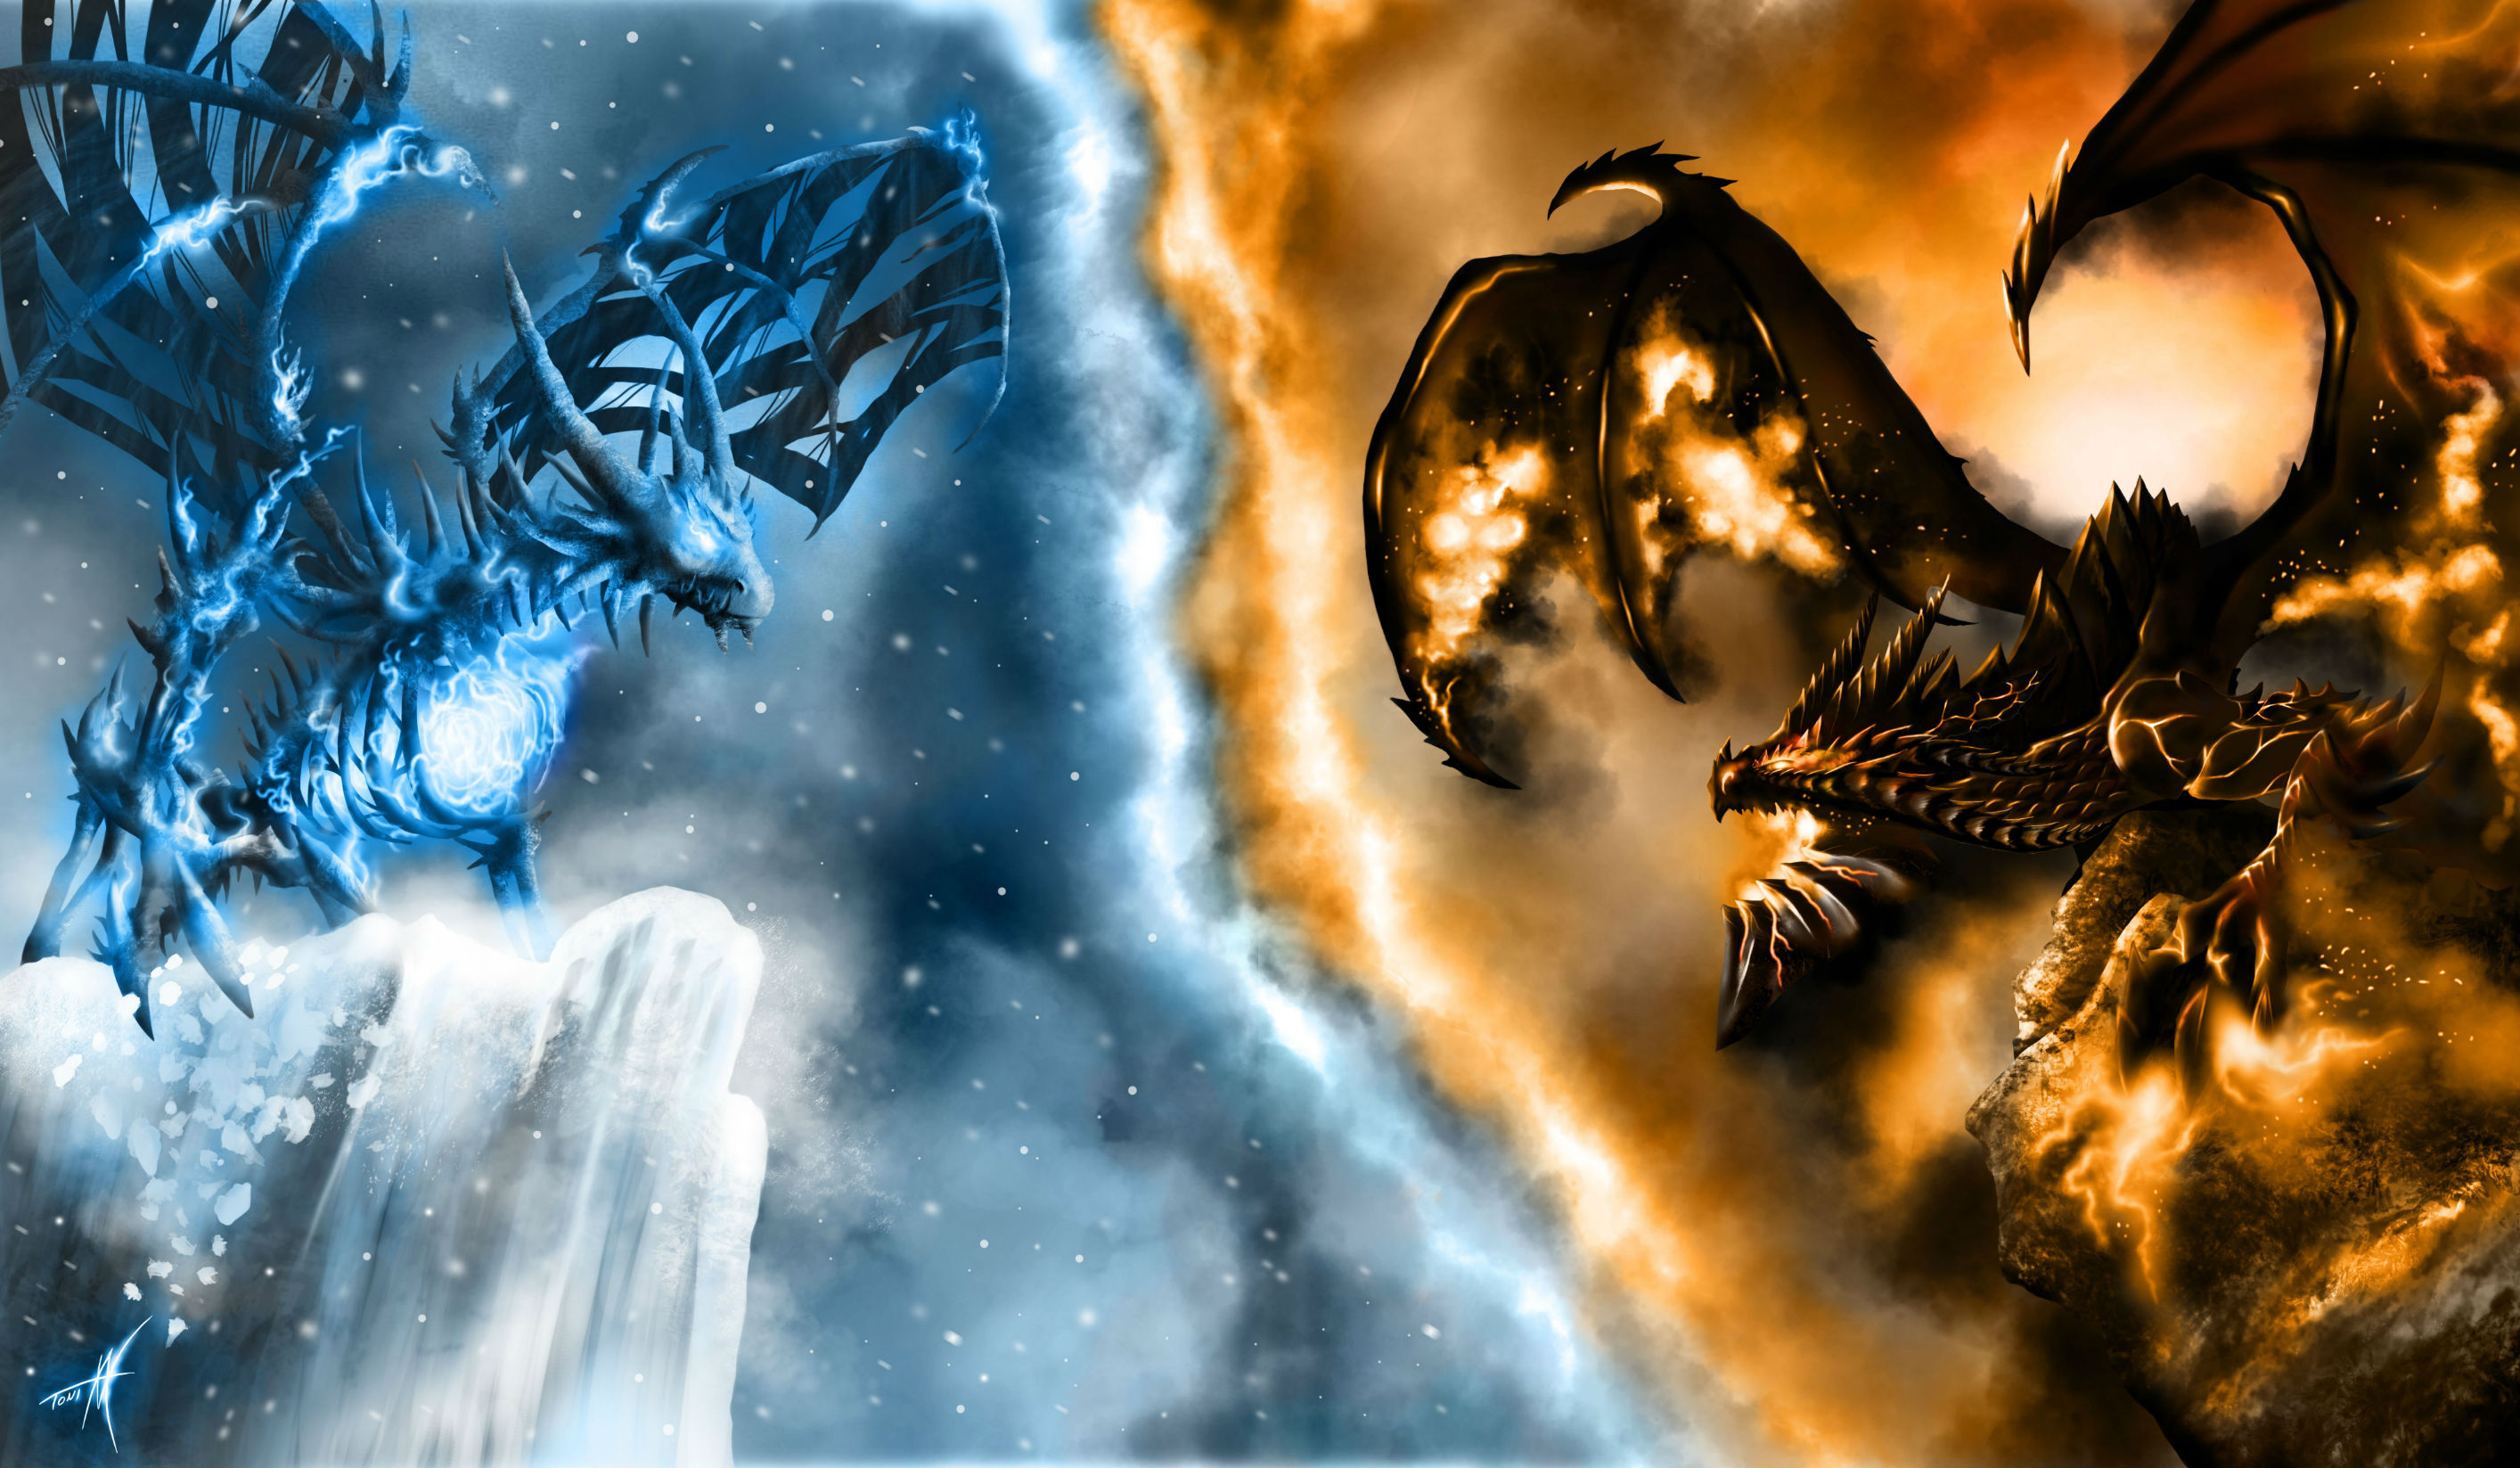 Cool Ice Dragon Wallpaper World Of Warcraft Wow Dragons